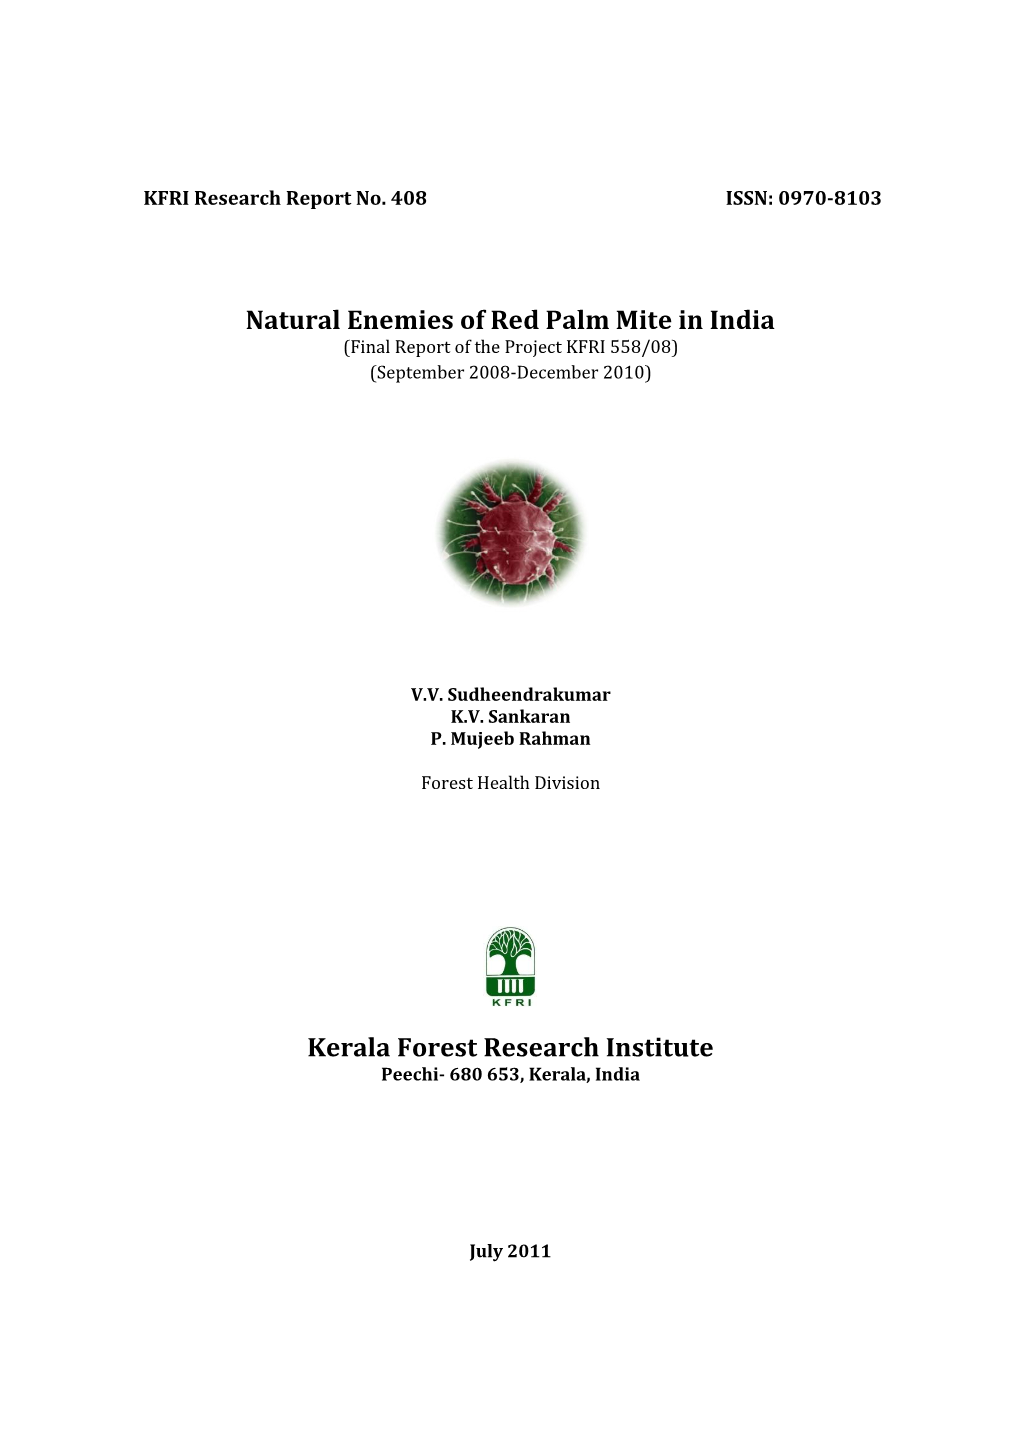 Natural Enemies of Red Palm Mite in India Kerala Forest Research Institute